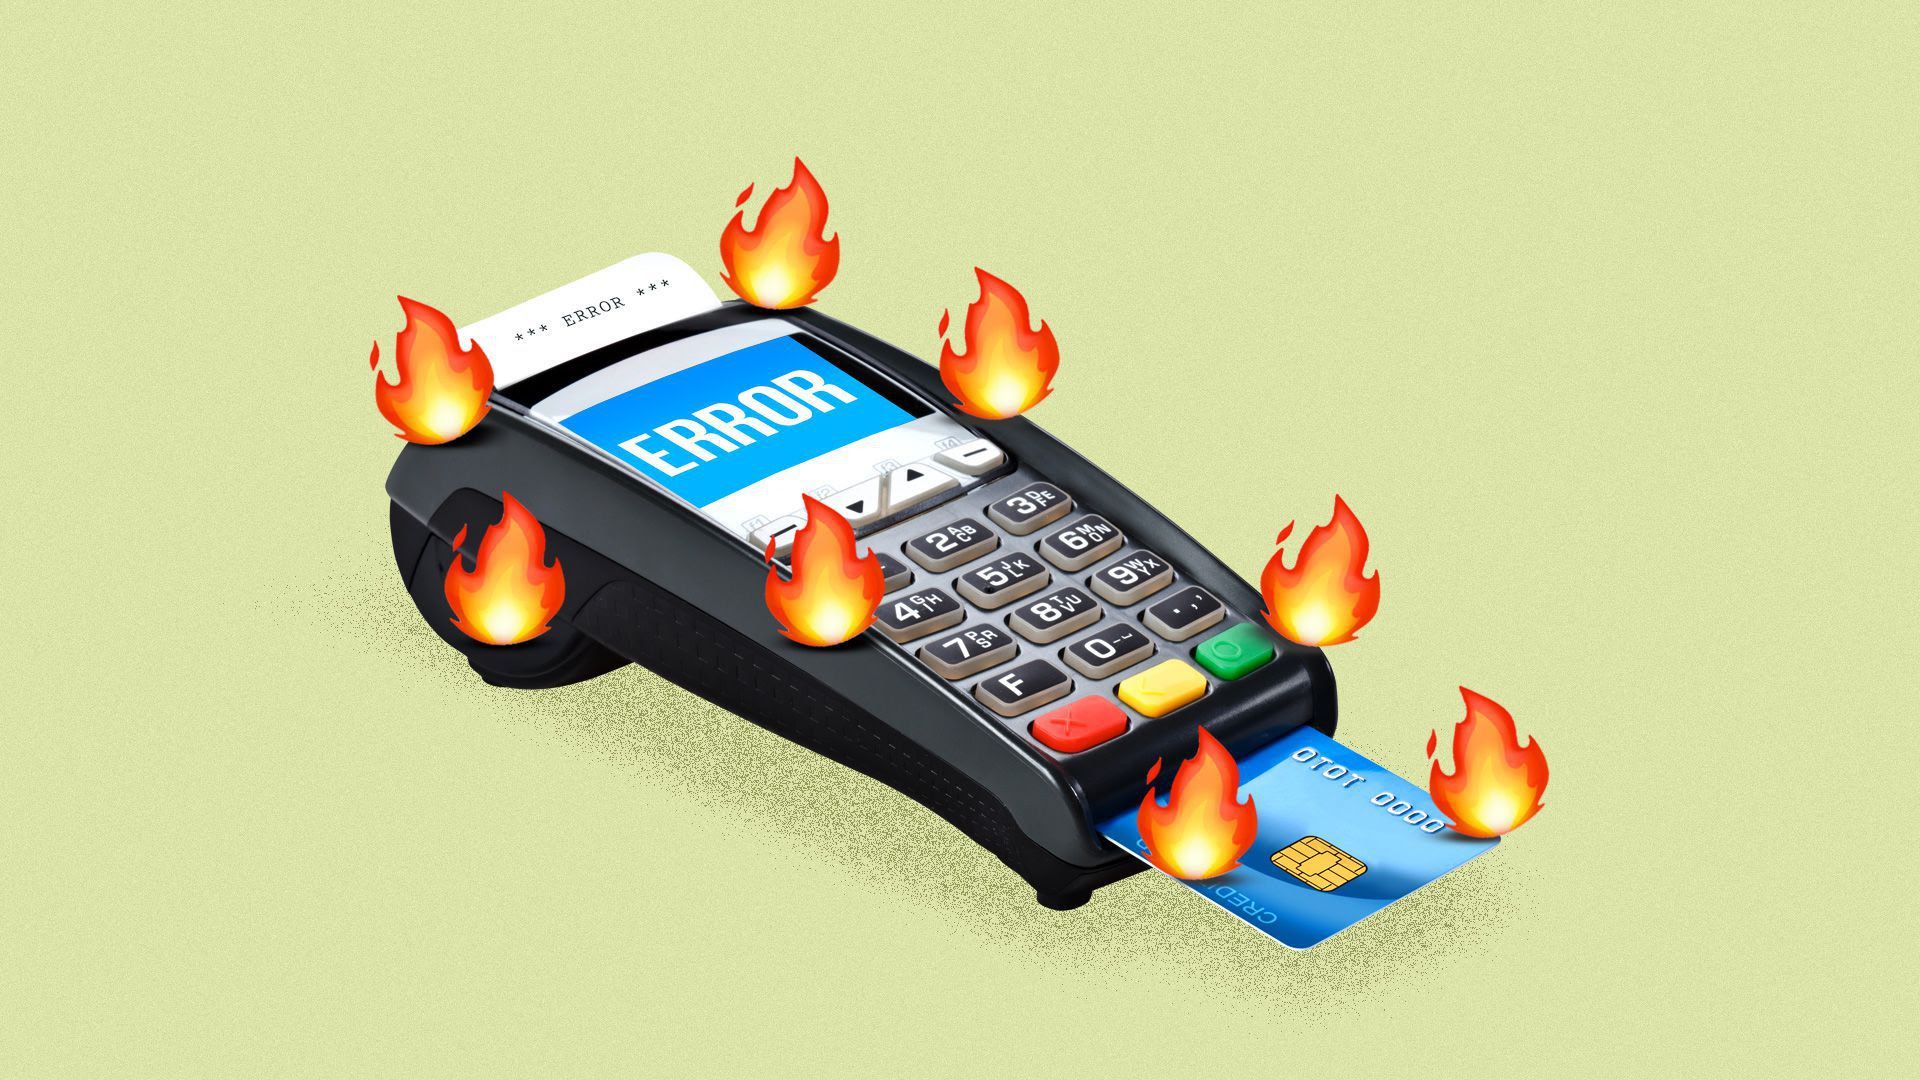 an illustration of a credit card scanner on fire